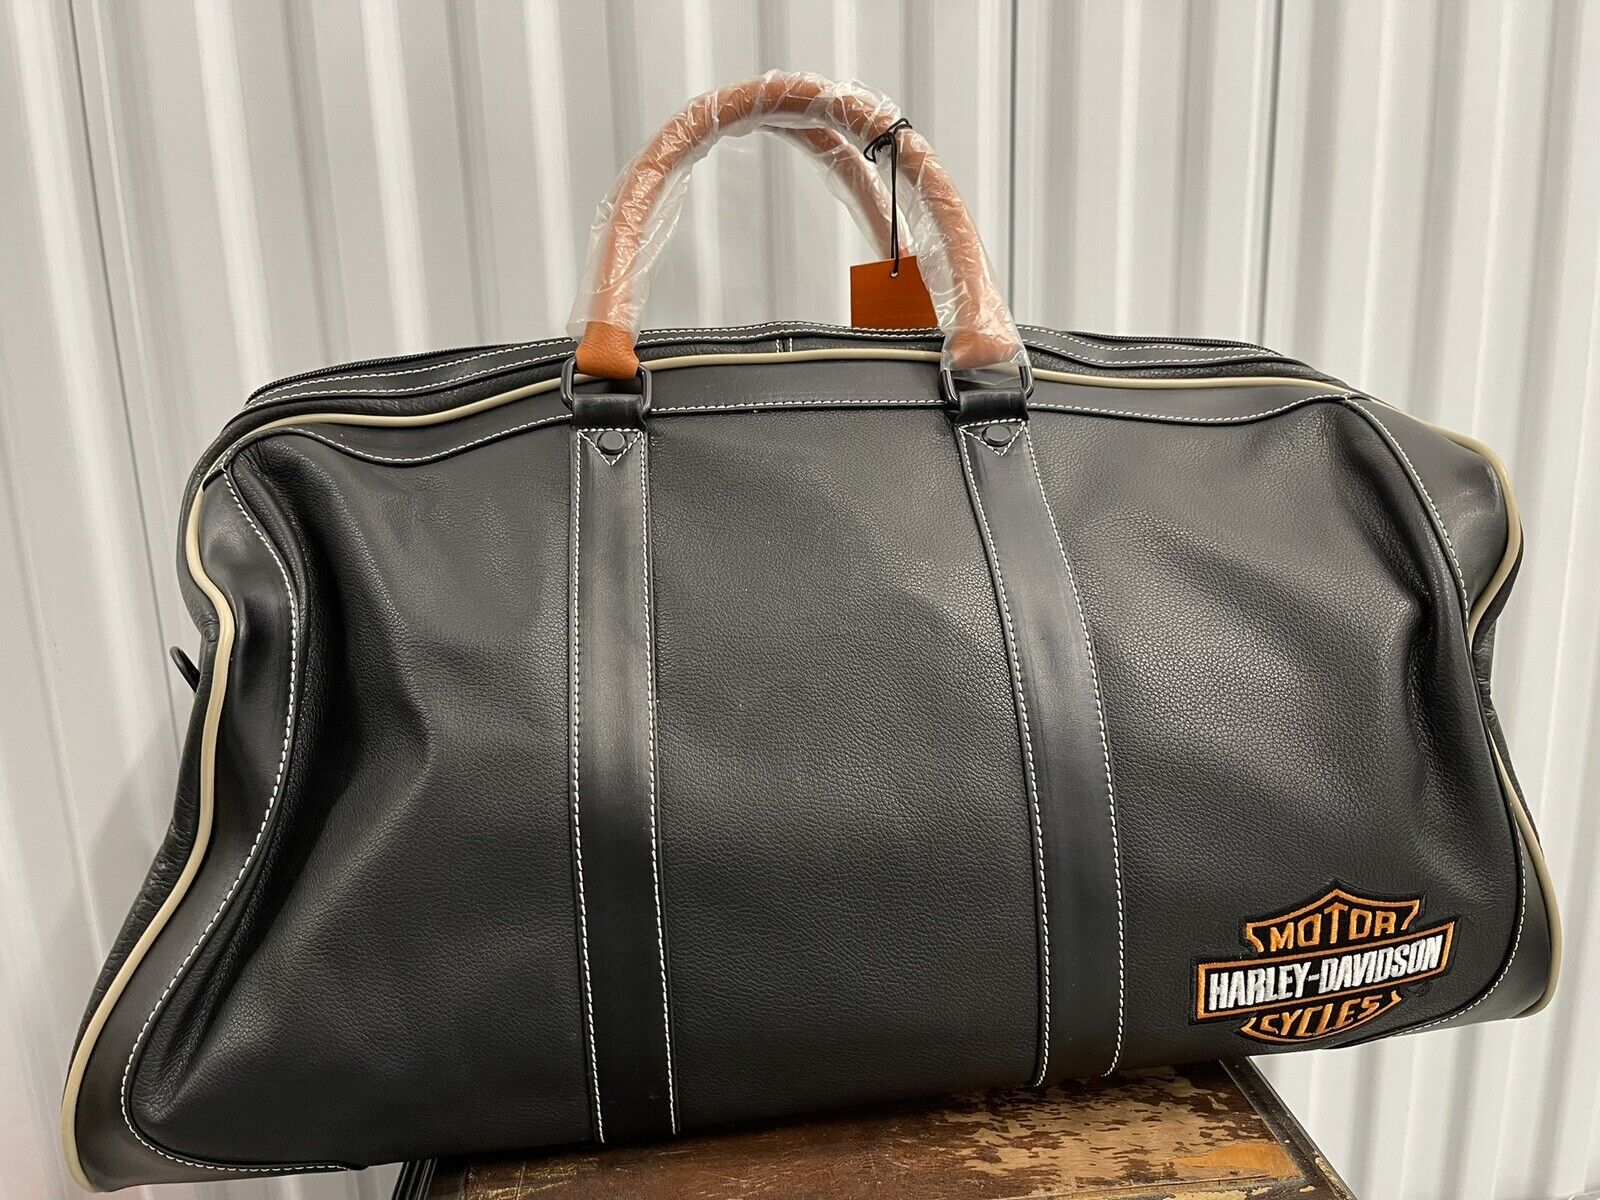 Harley Davidson Leather Duffle Bag Travel Black motorcycle carryon NWT- Lottery